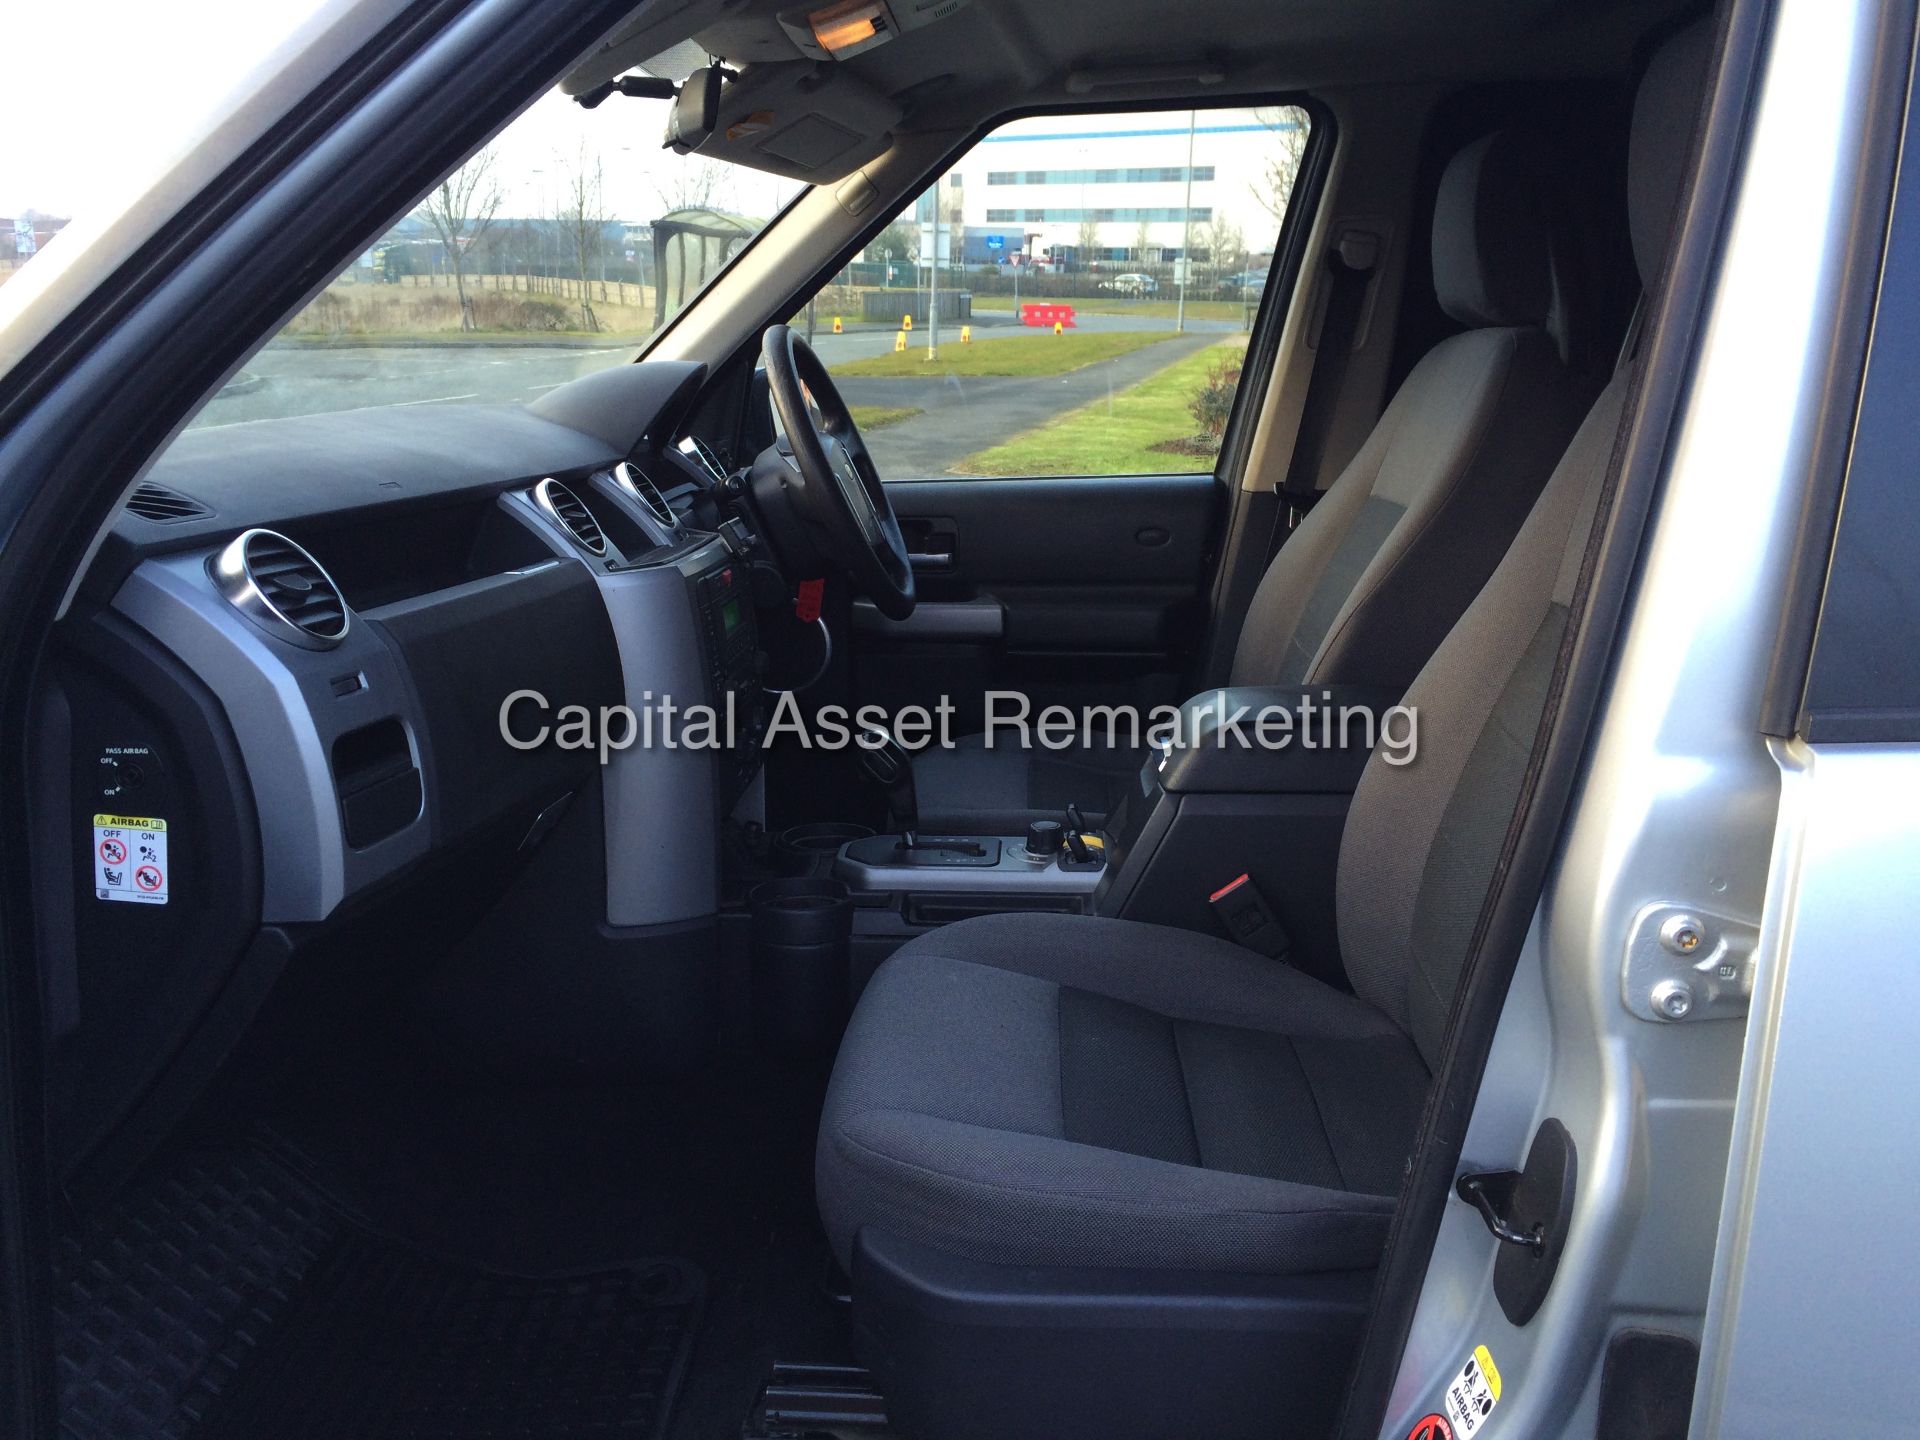 LANDROVER DISCOVERY 3 "TDV6" AUTOMATIC - 1 PREVIOUS OWNER FROM NEW - AIR SUSPENSION - PRIVACY GLASS! - Image 12 of 18